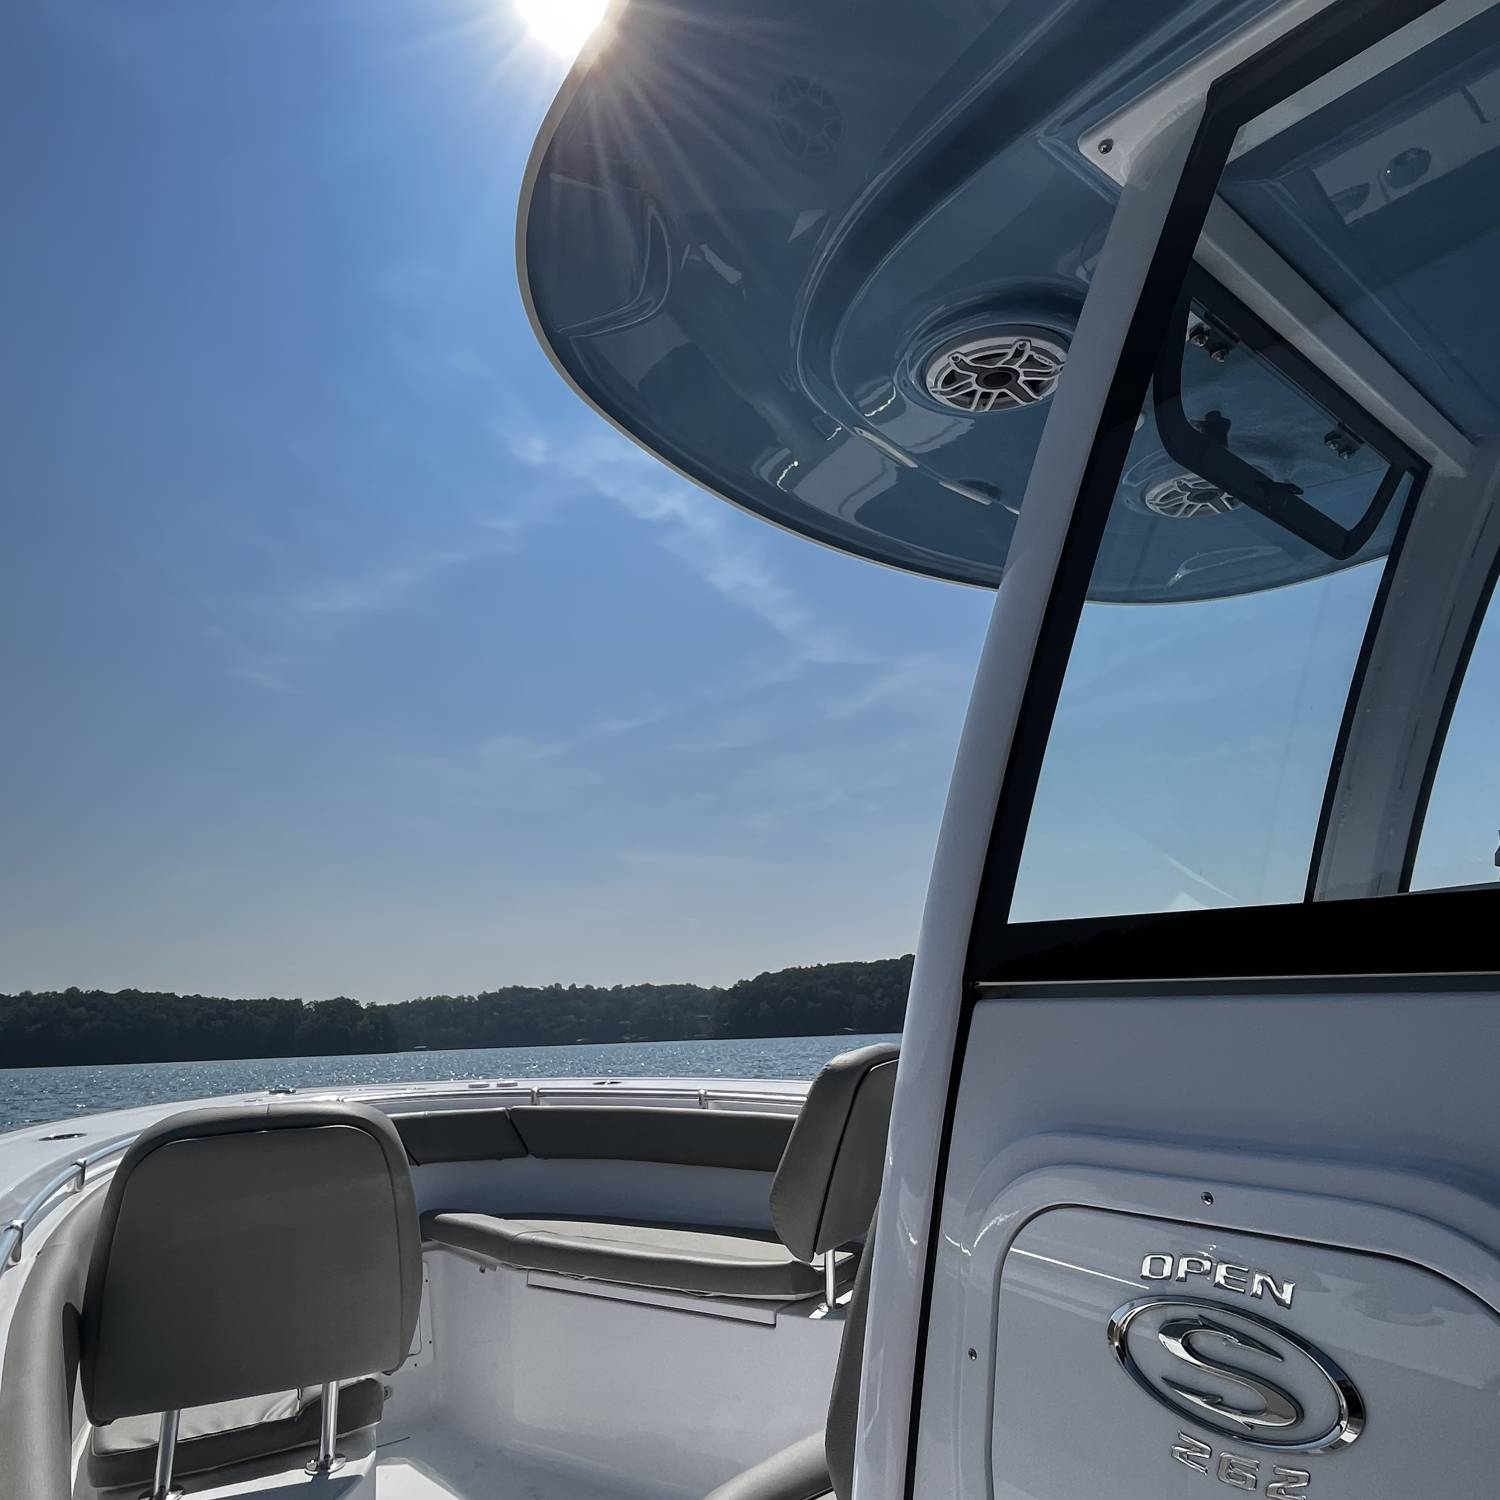 Title: Sold! - On board their Sportsman Open 262 Center Console - Location: Lake Lanier. Participating in the Photo Contest #SportsmanSeptember2023